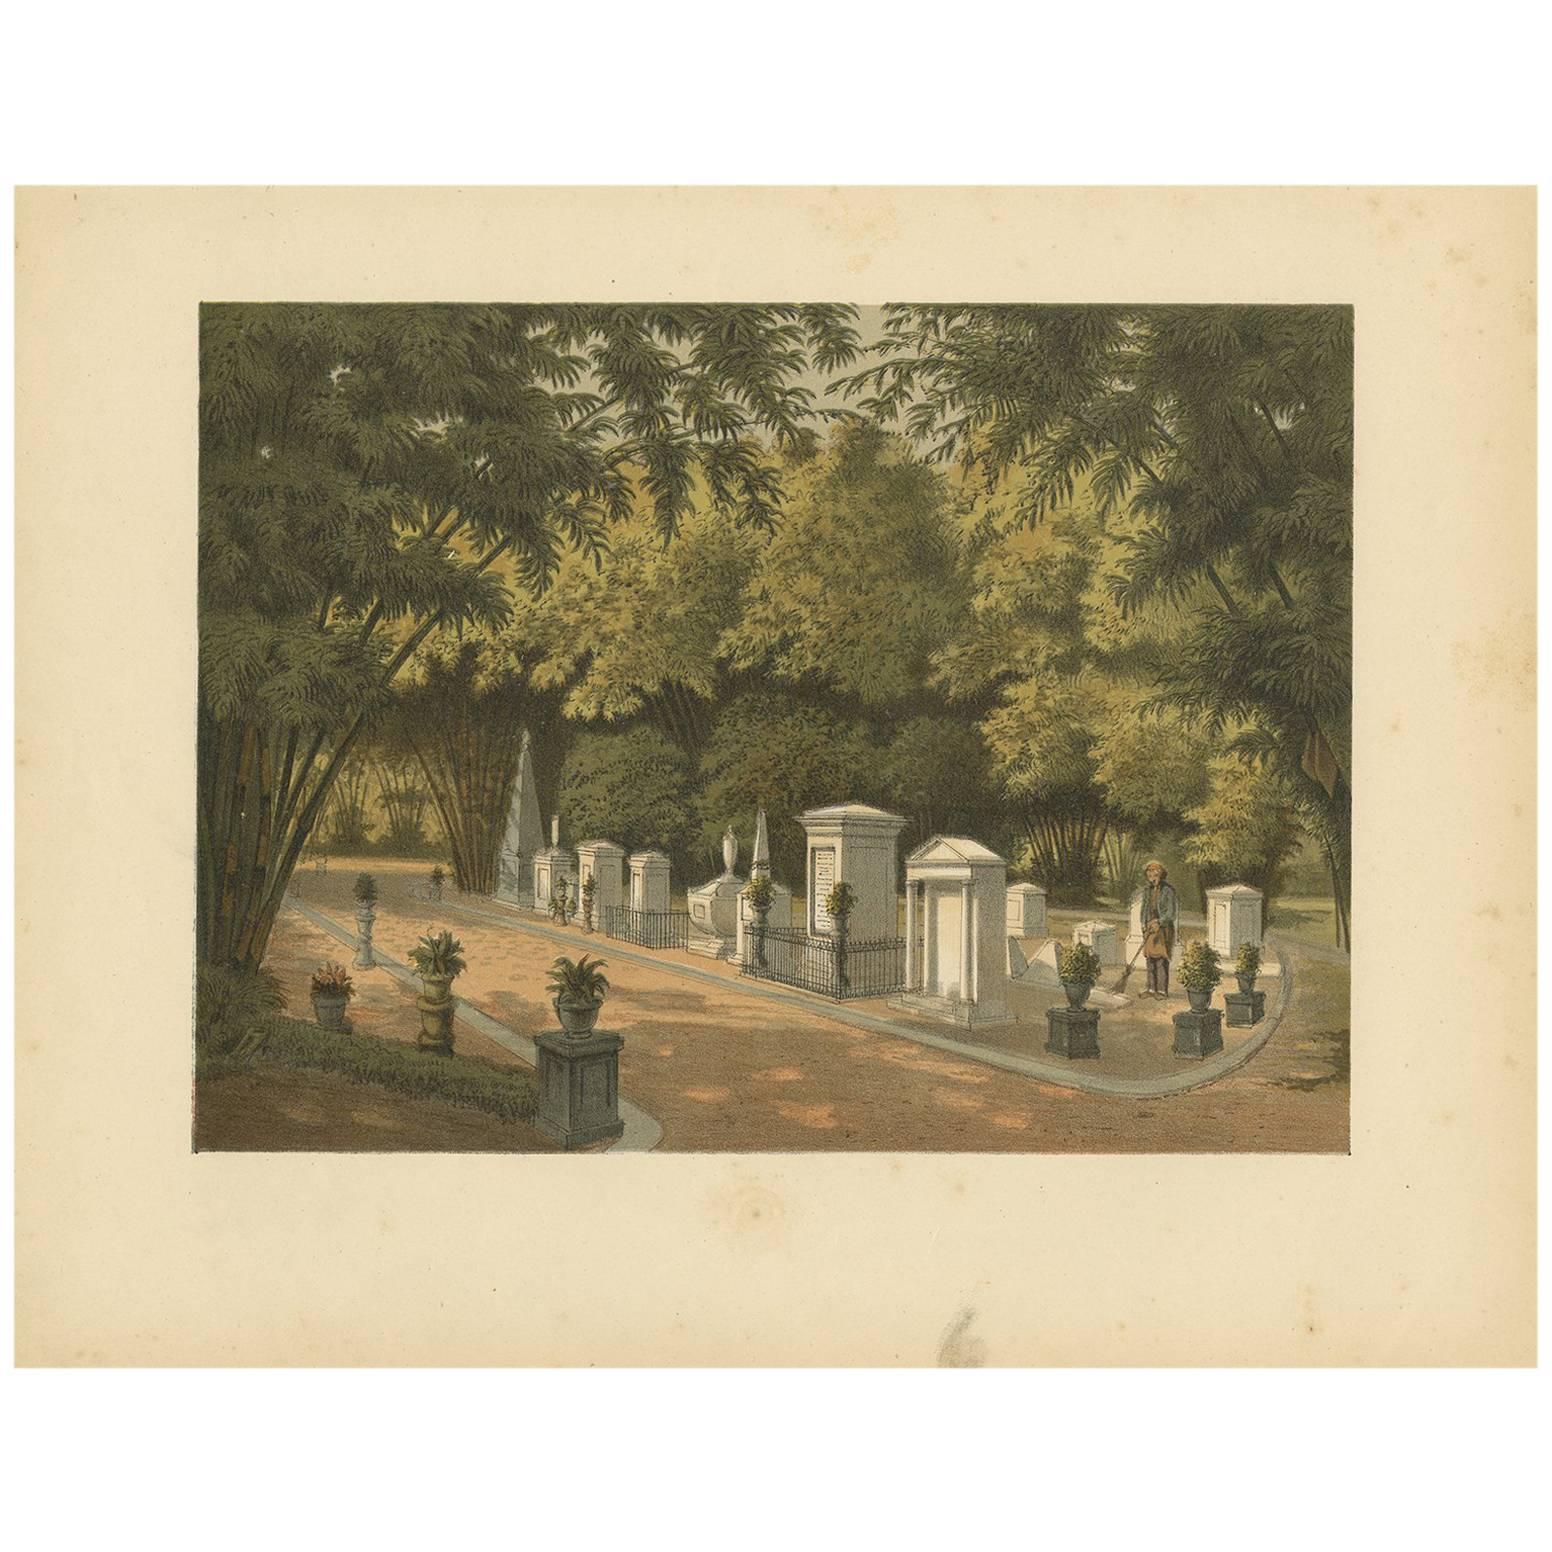 Antique Print of a Cemetery in Buitenzorg by M.T.H. Perelaer, 1888